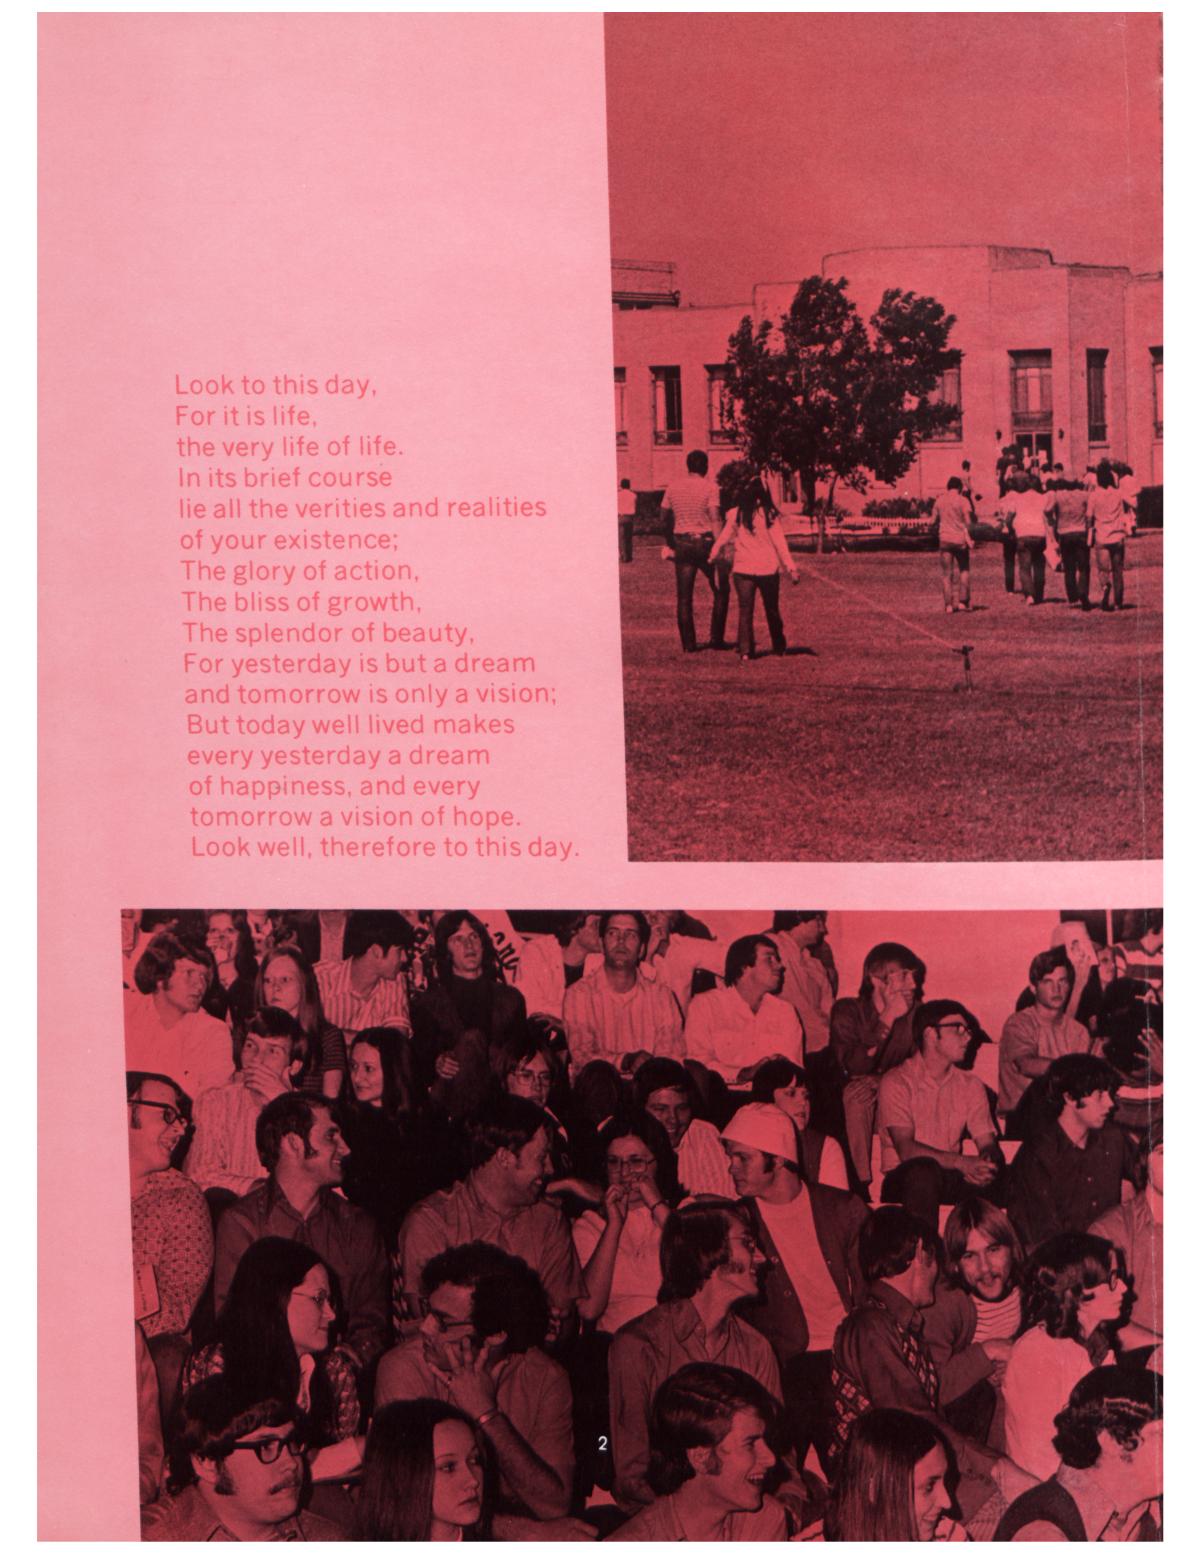 The Totem, Yearbook of McMurry College, 1973
                                                
                                                    2
                                                